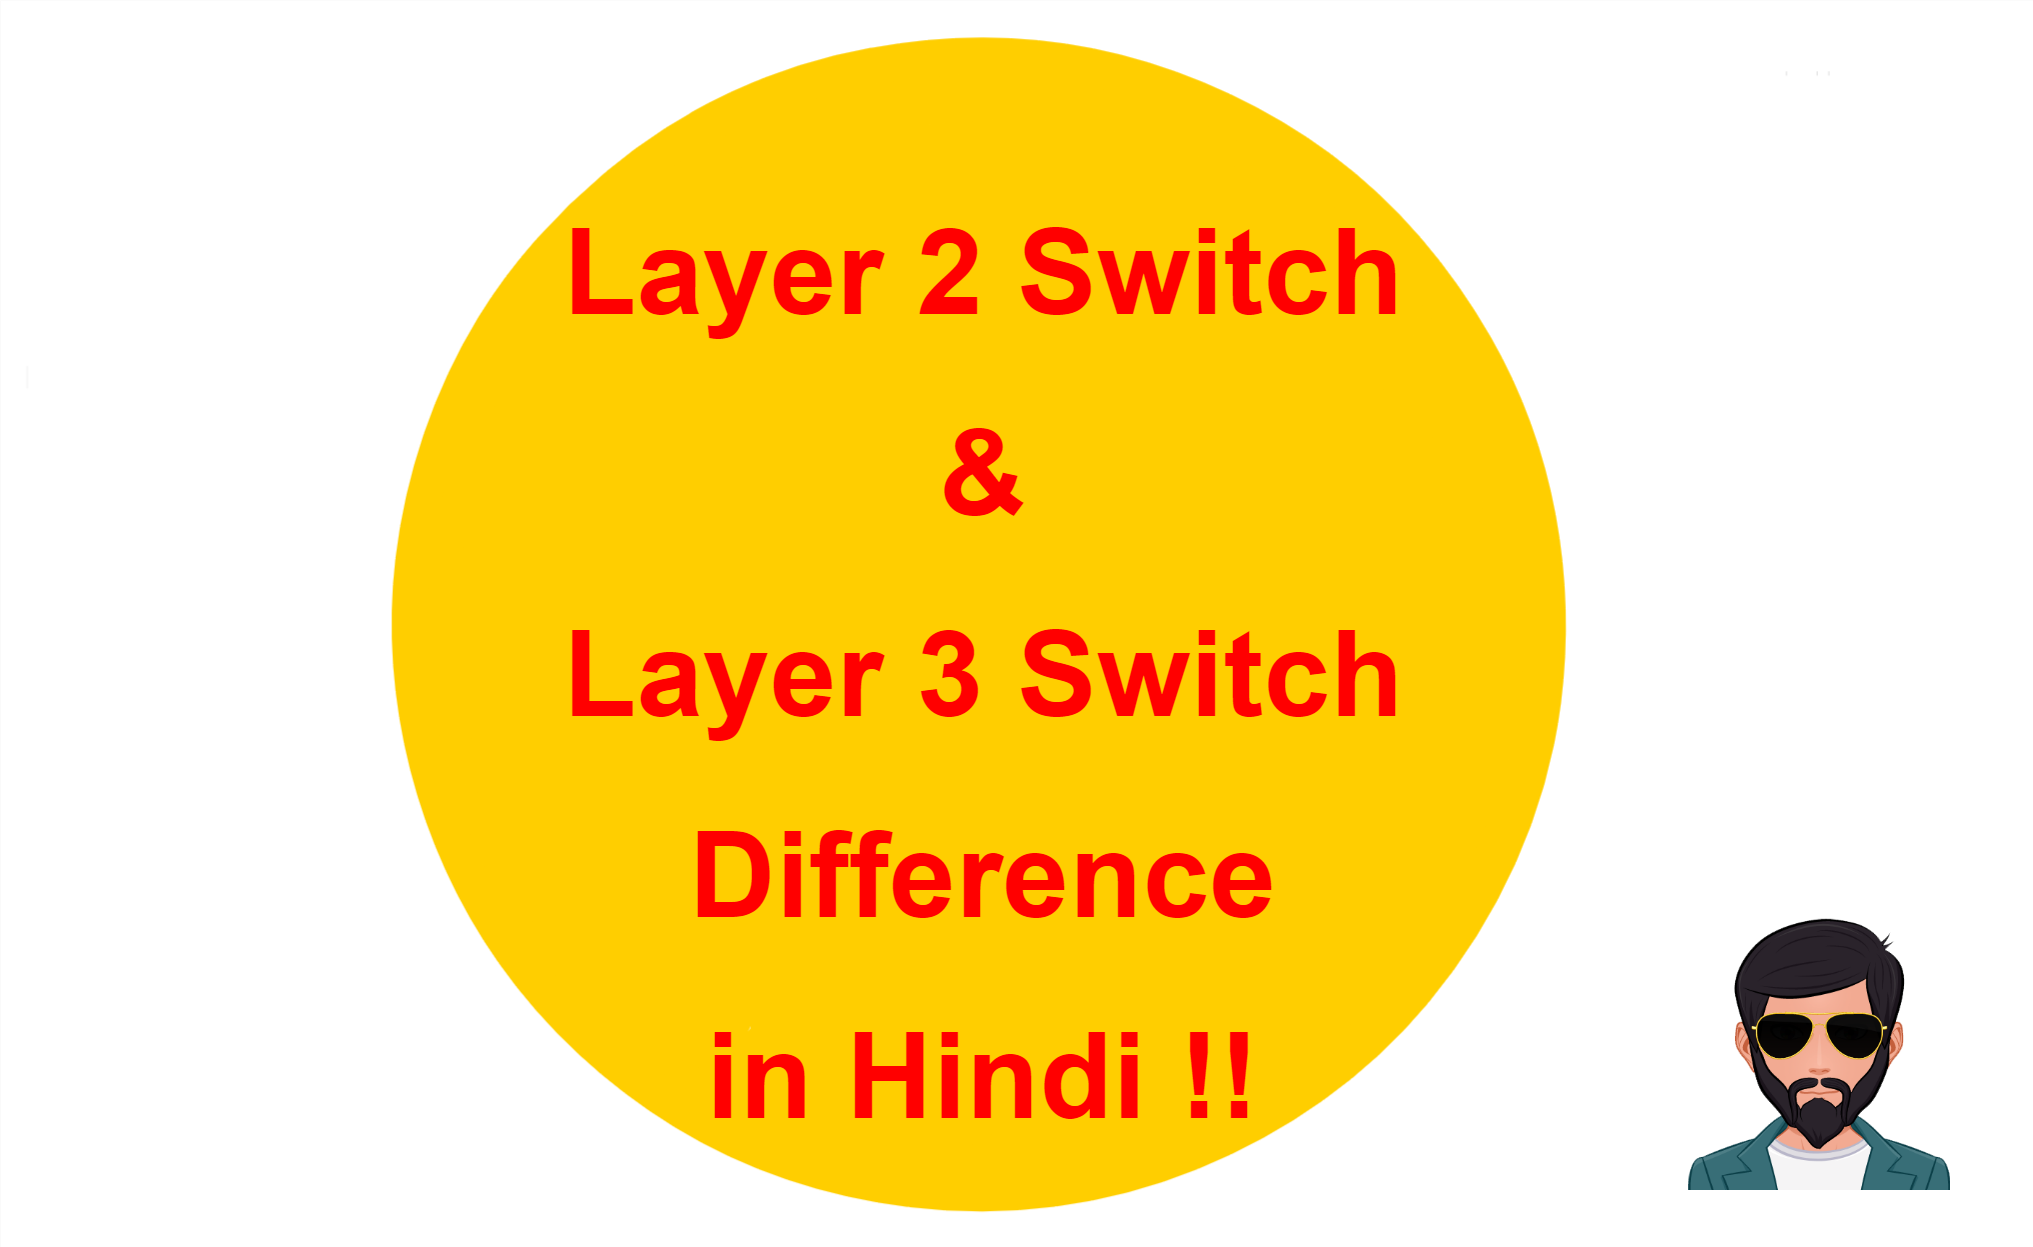 You are currently viewing Layer 2 Switch & Layer 3 Switch Difference in Hindi !!